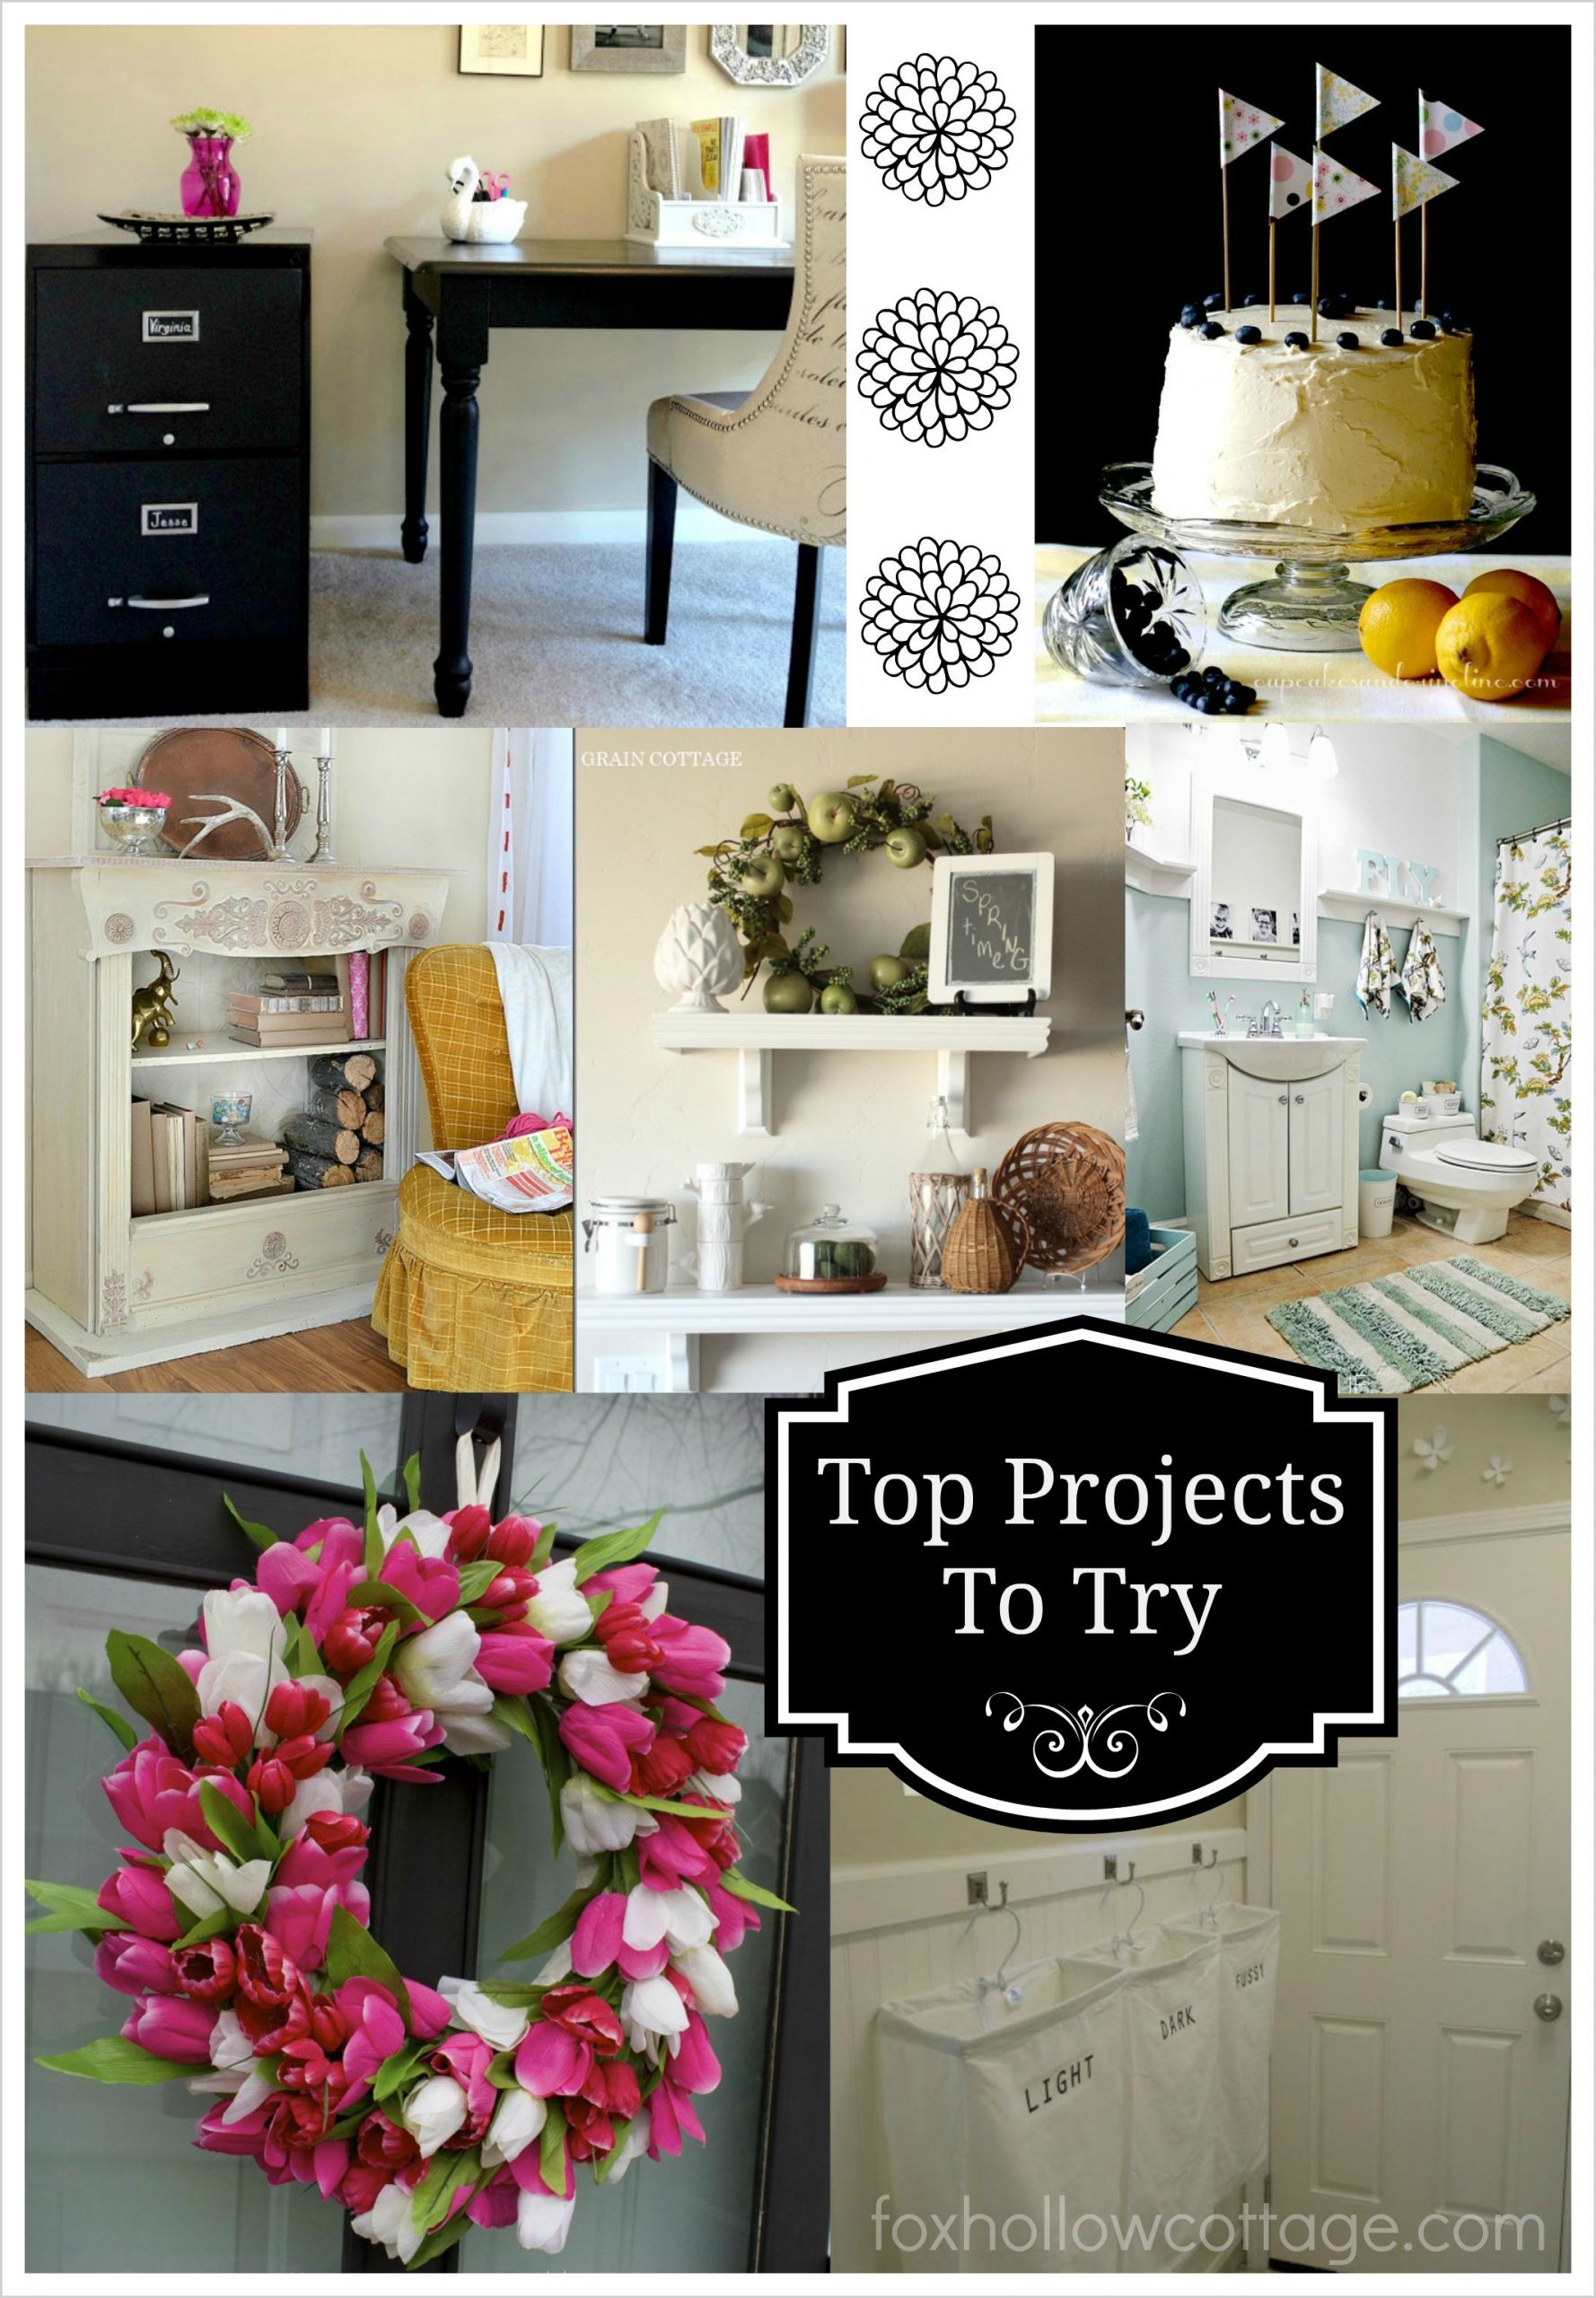 Top DIY Home Decor Blogs
 Power Pinterest Link Party and Friday Fav Features 